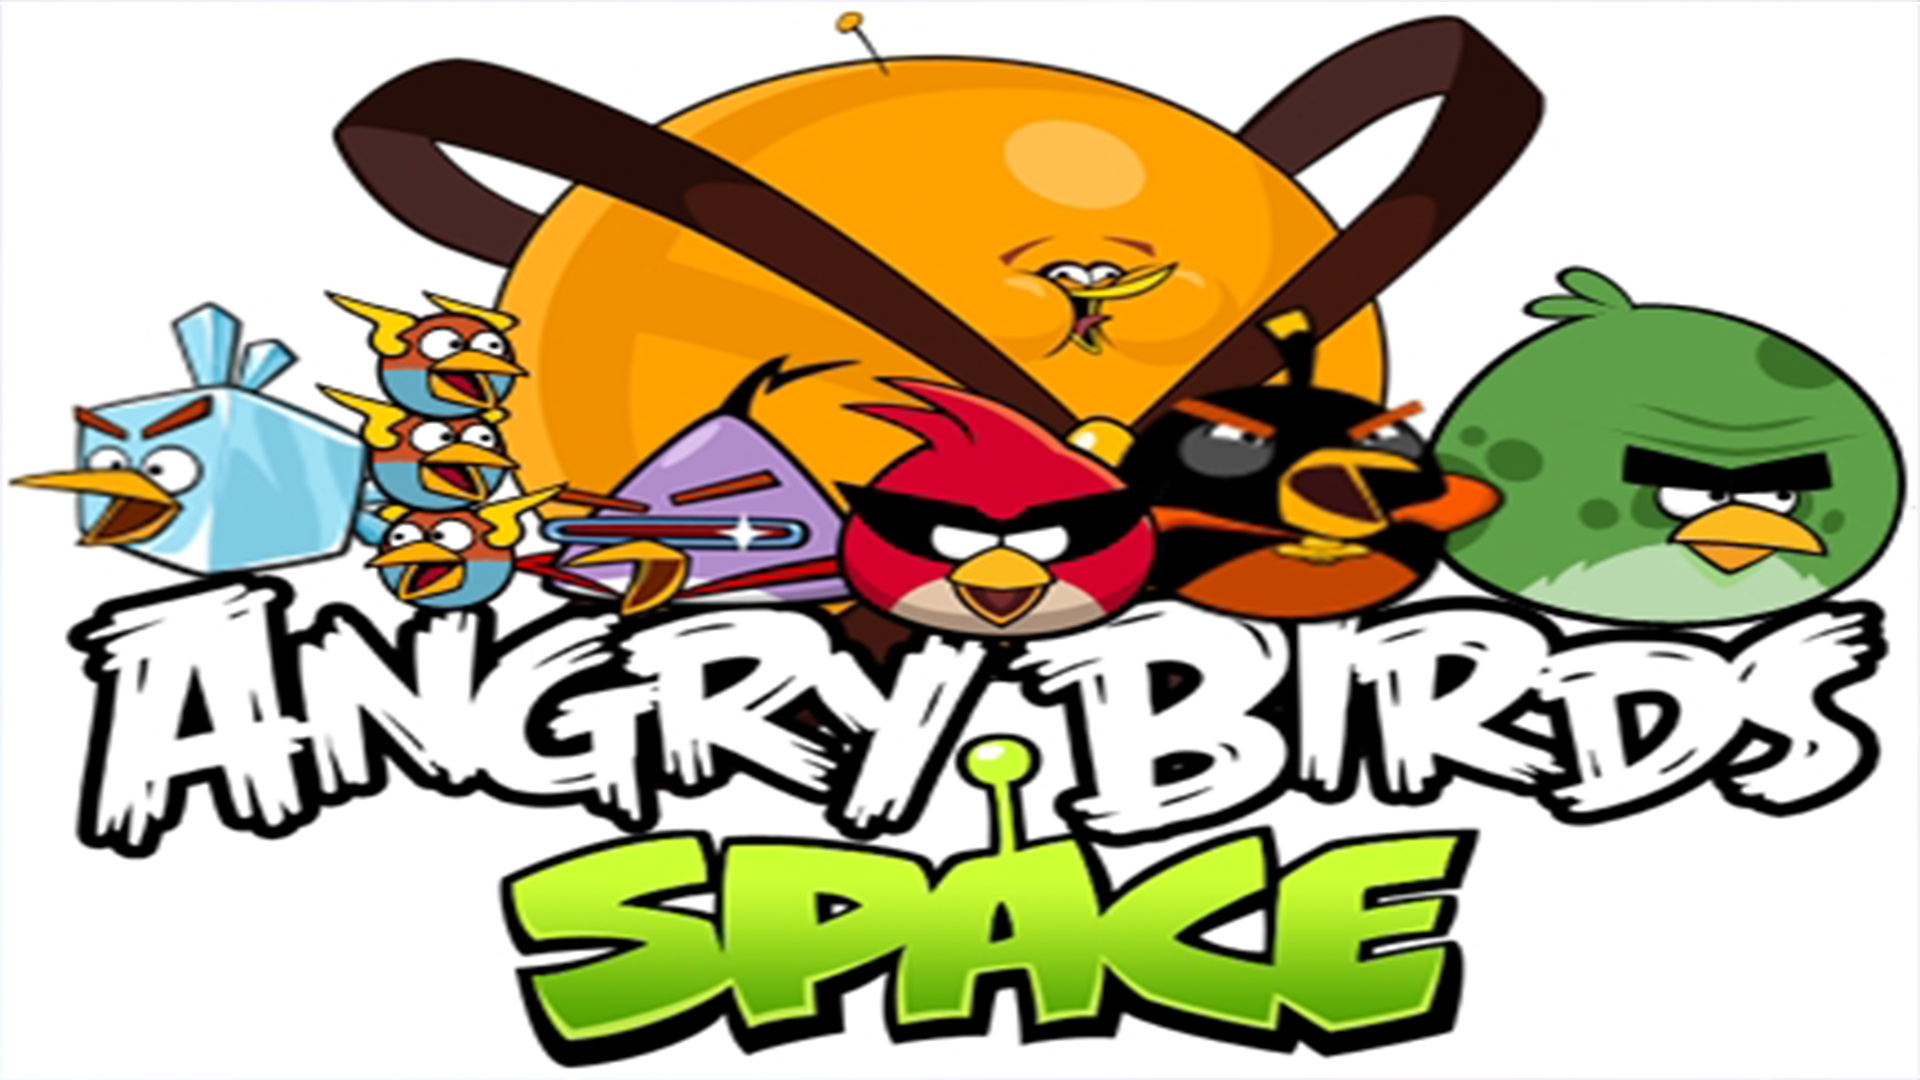 Angry Birds Space Wallpapers